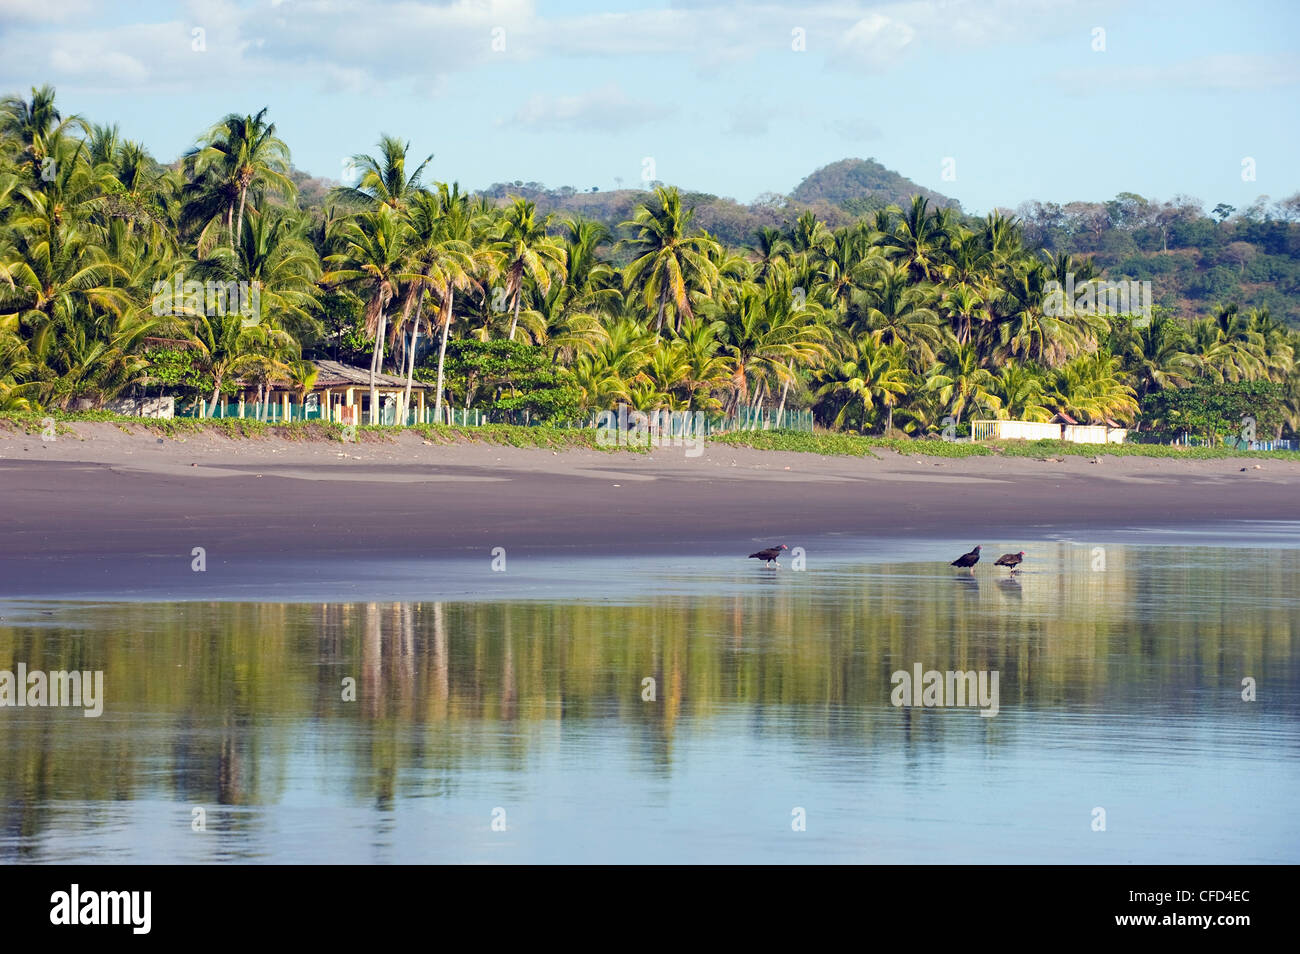 Vultures on the beach at Playa Sihuapilapa, Pacific Coast, El Salvador, Central America Stock Photo